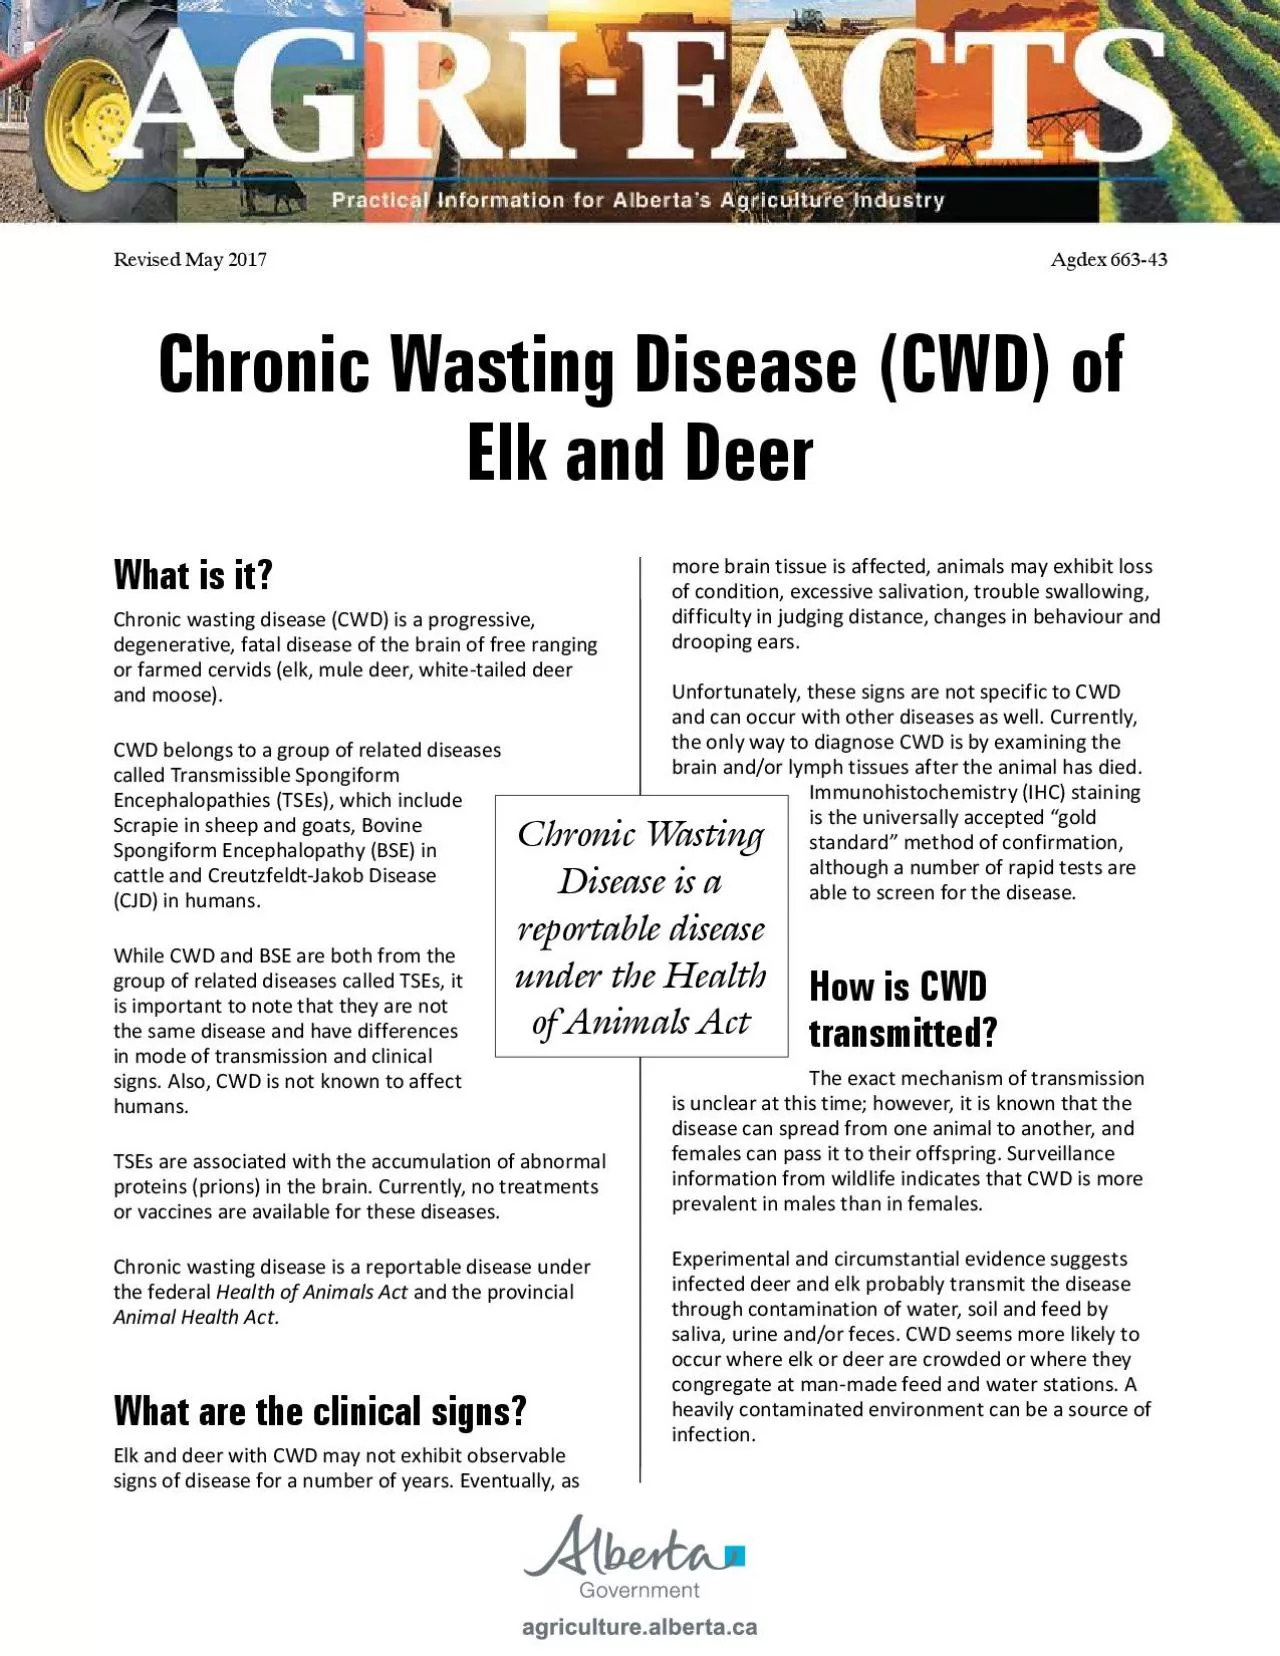 Revised May 2017Chronic Wasting Disease CWD of